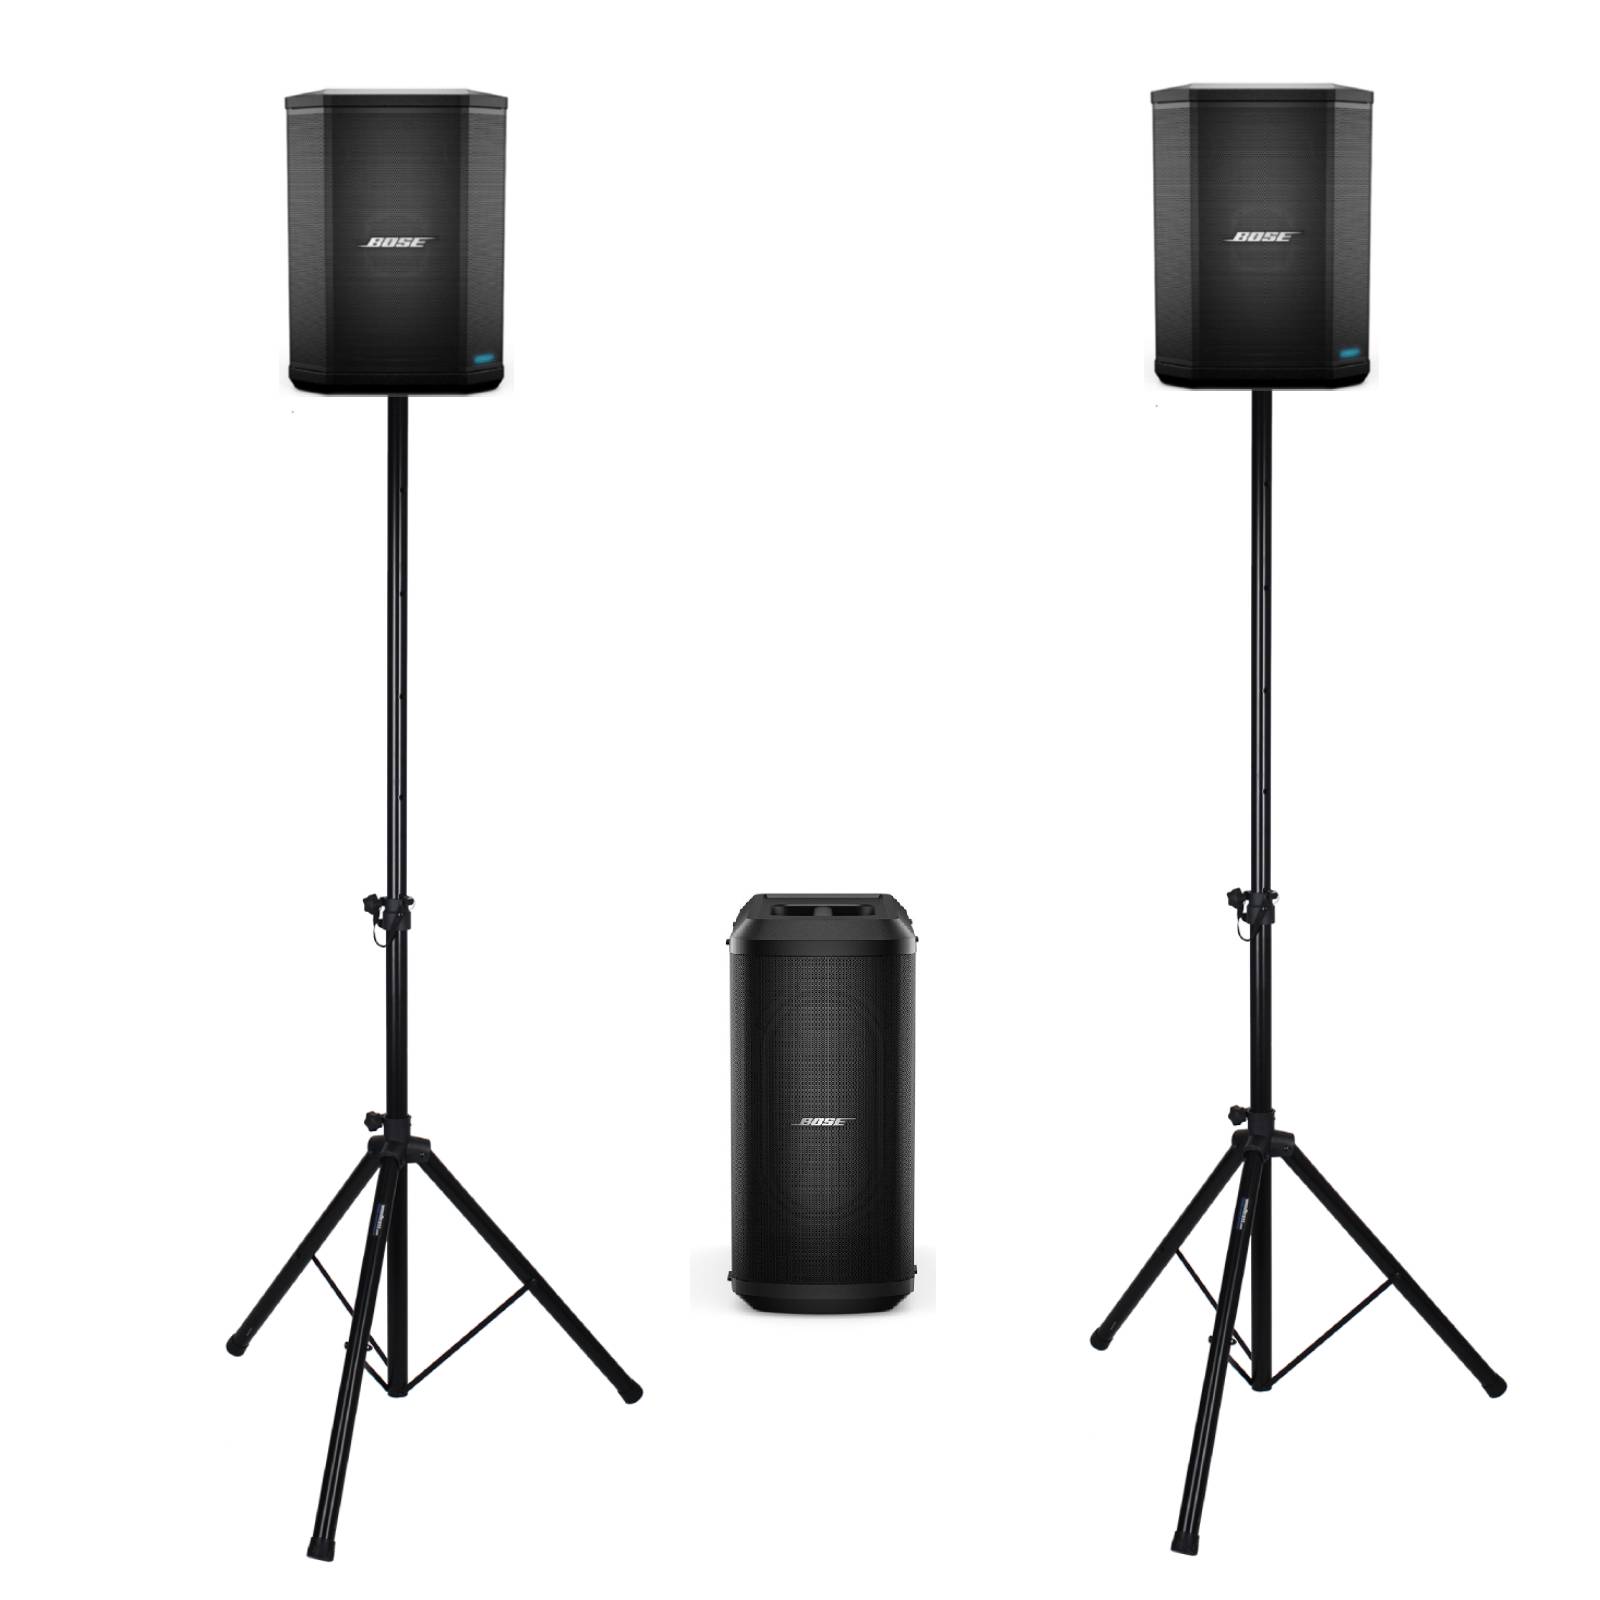 BATTERIE + PROFESSIONAL PRO S1 SYSTEM PACK KABELS MIT + + BOSE STANDS SUB2